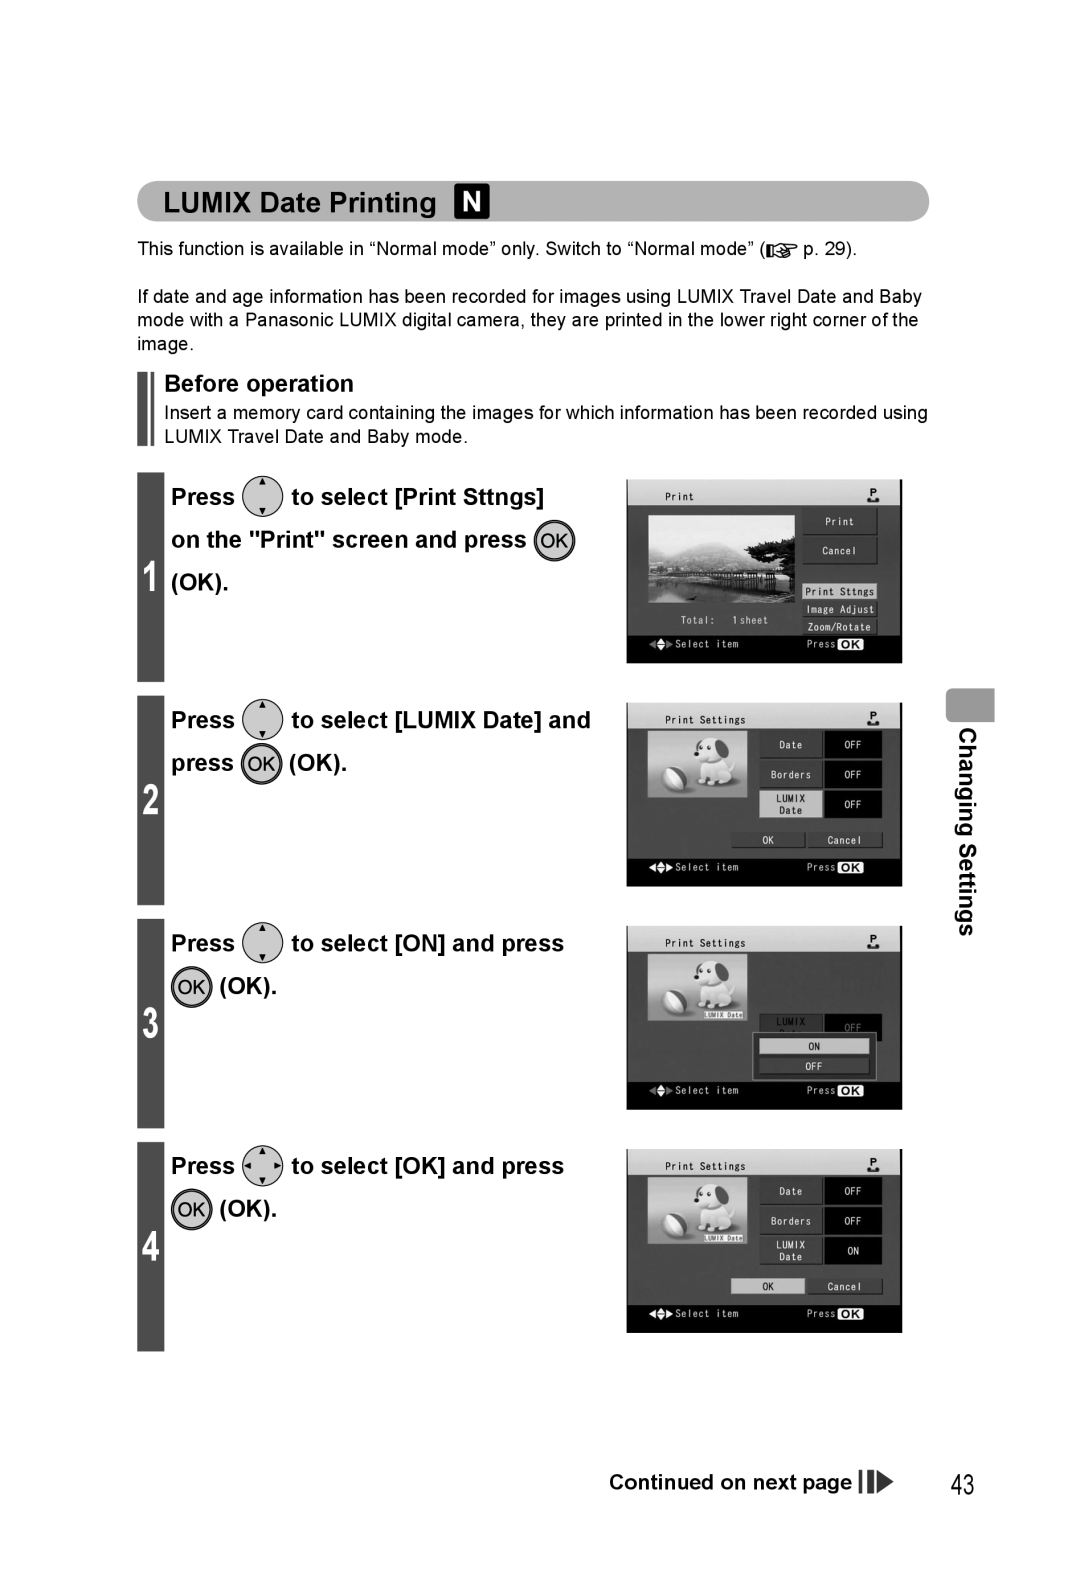 Panasonic KX-PX20M LUMIX Date Printing, Press to select Print Sttngs on the Print screen and press 1 OK, Before operation 